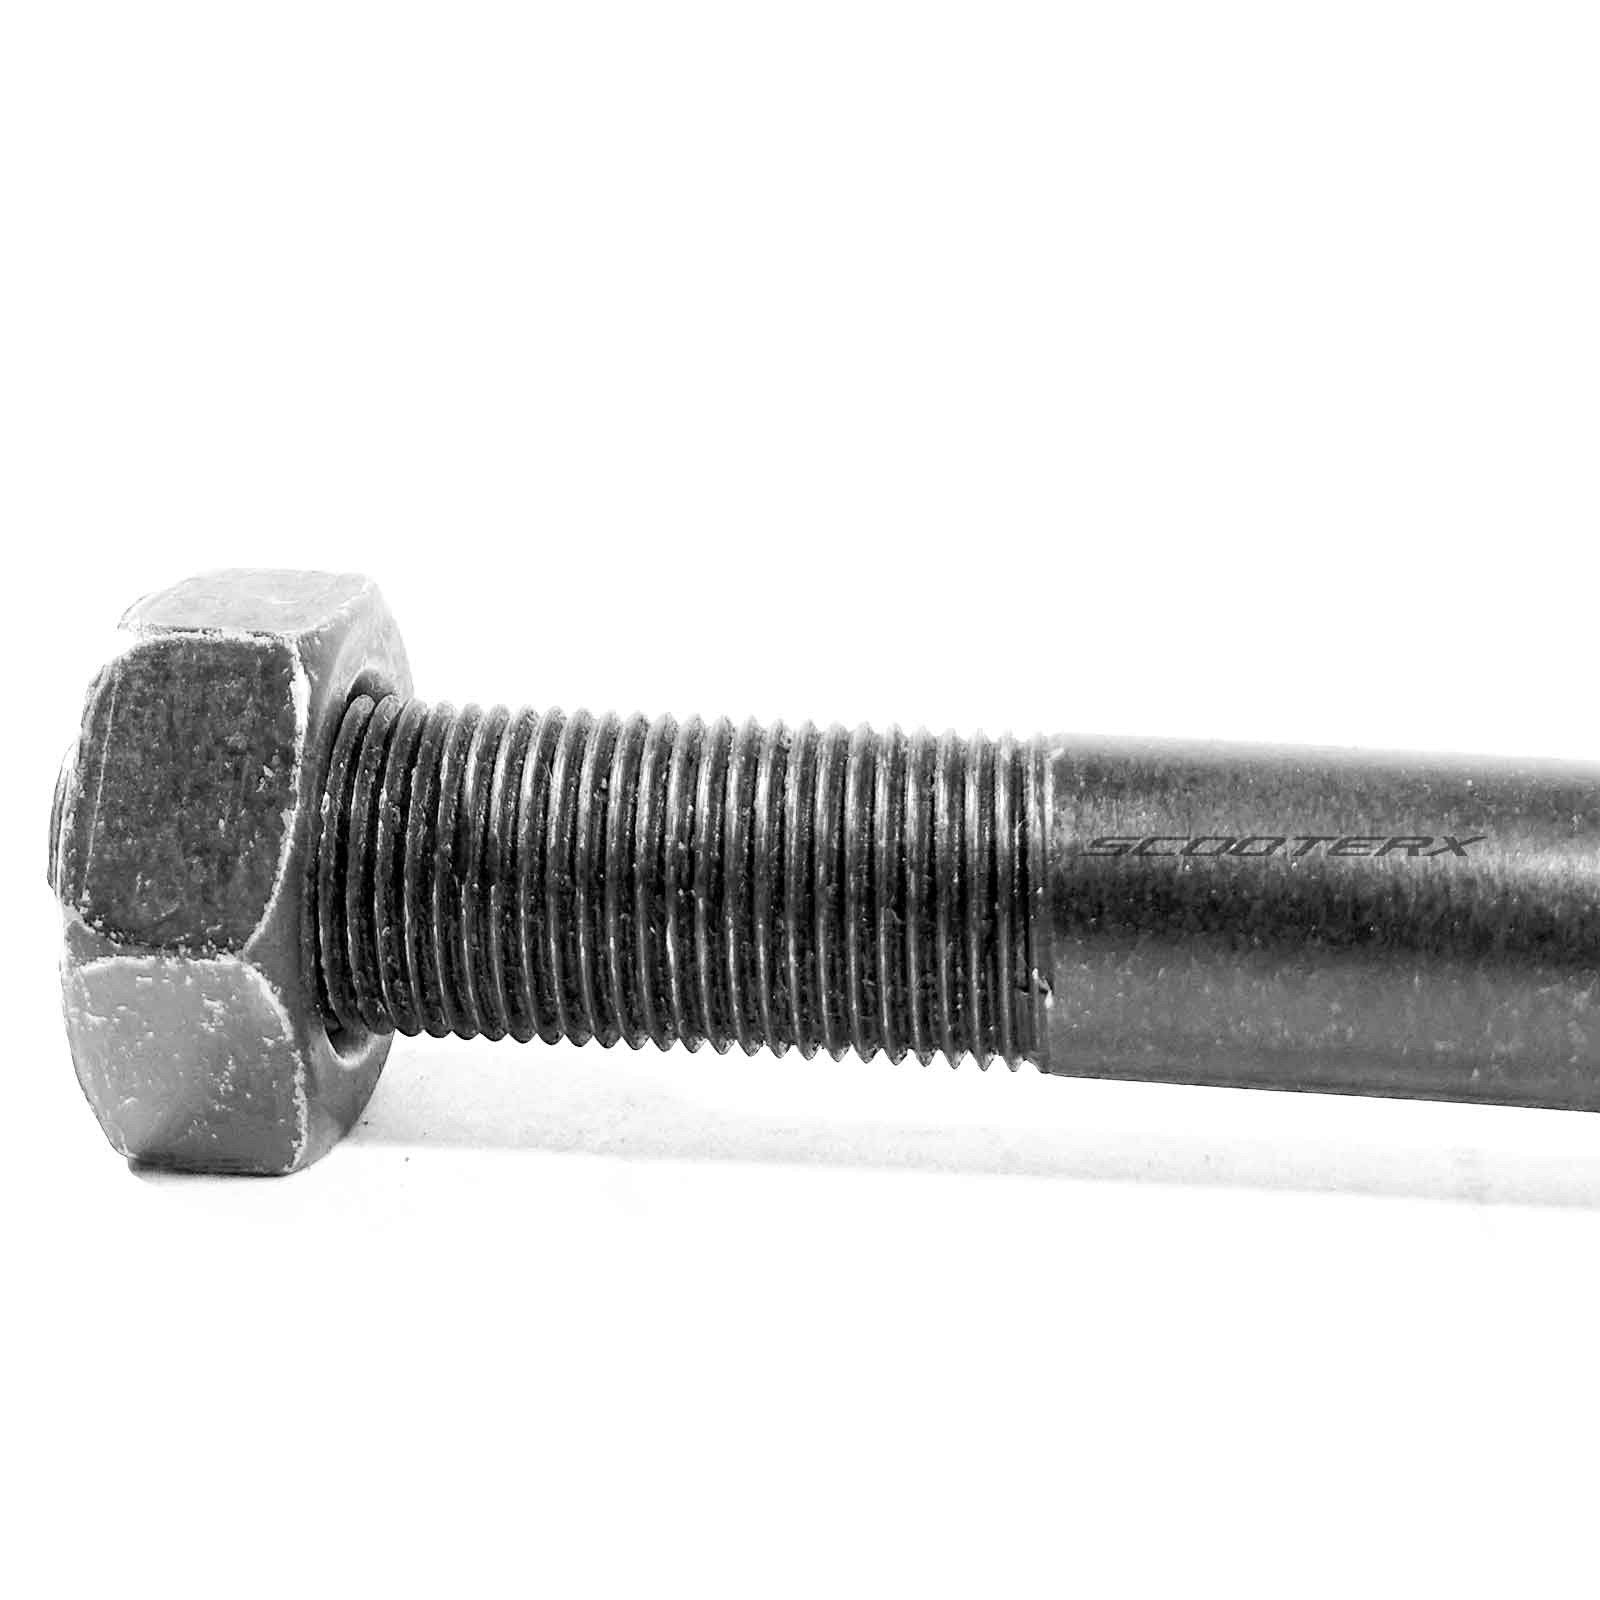 ScooterX 10mm x 7.5"﻿ AXLE FRONT W/ NUTS For Dirt Dog Gas Scooter